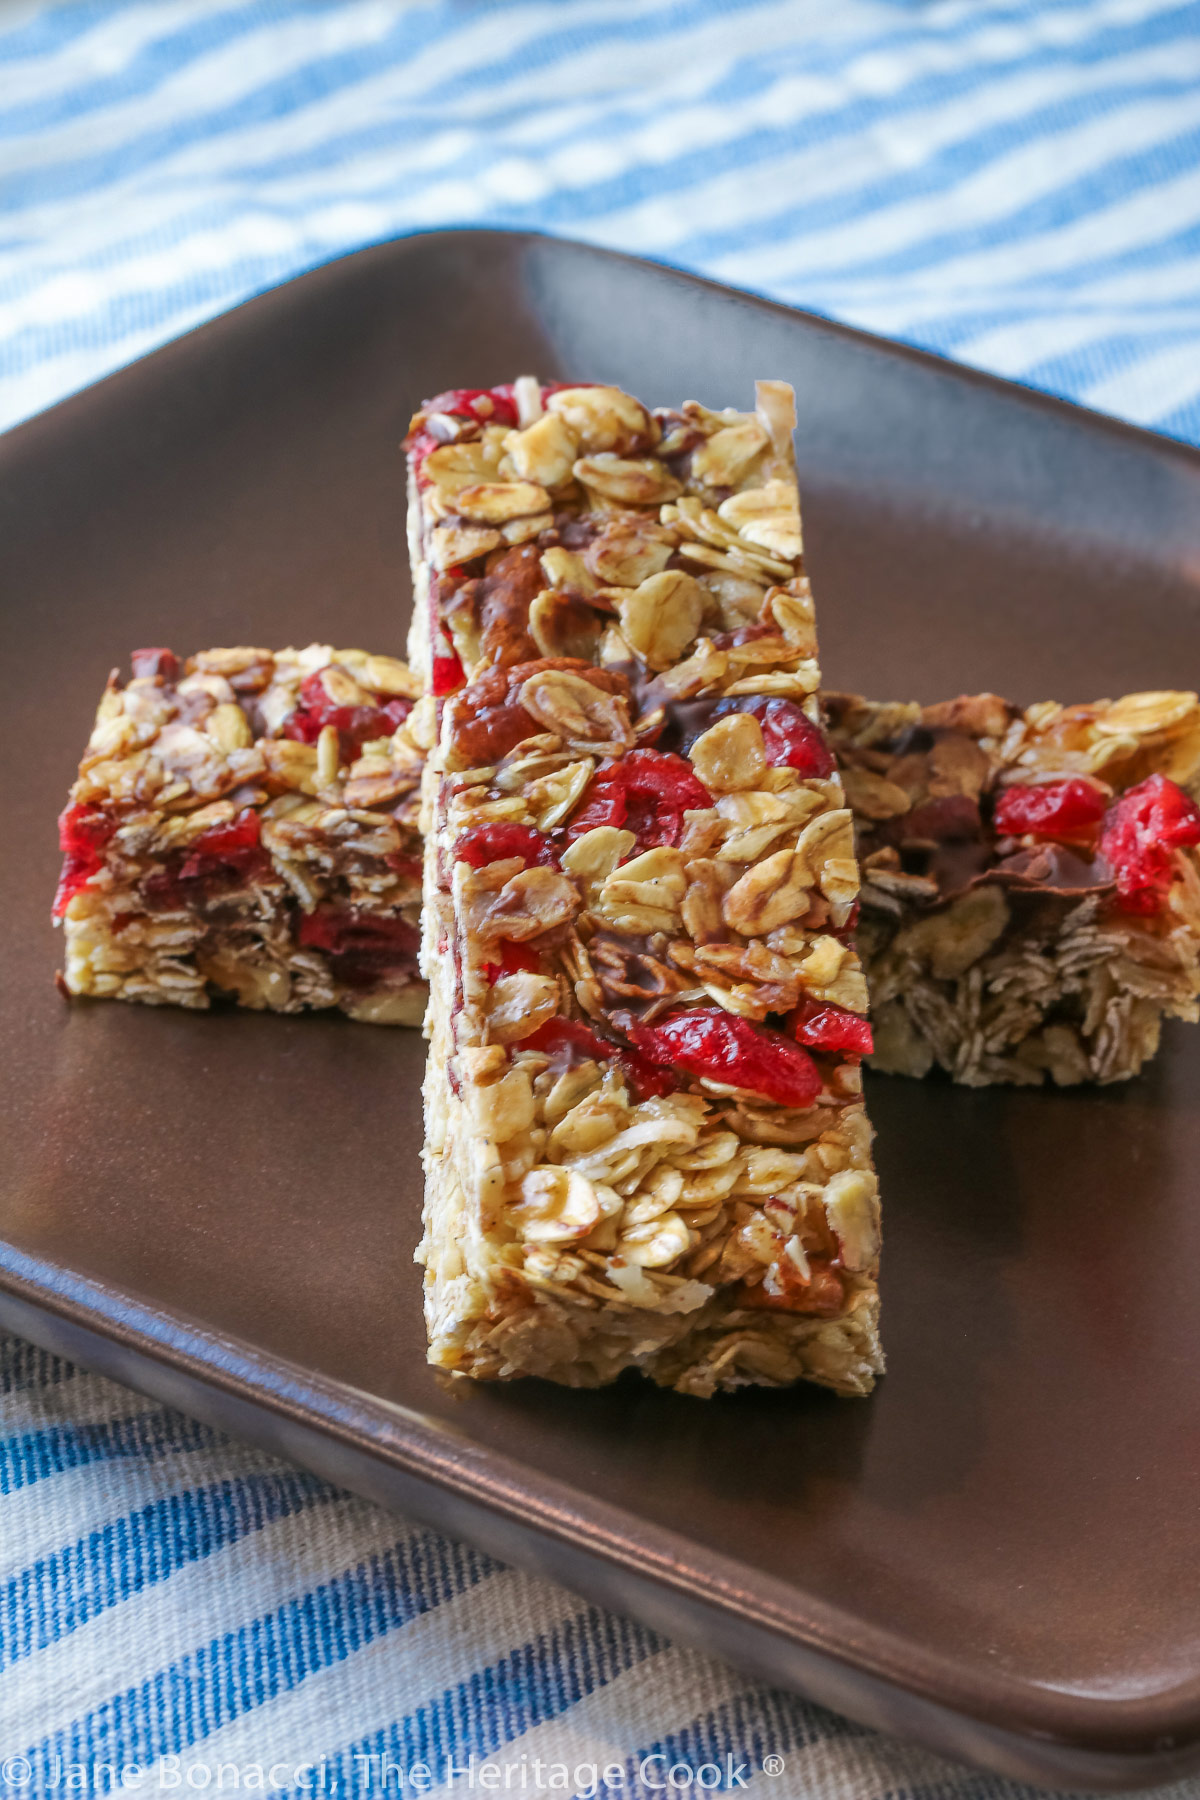 Two granola bars studded with red cranberries and chocolate set perpendicular to each other one on top in the shape of an X on a dark brown square plate © 2023 Jane Bonacci, The Heritage Cook. 